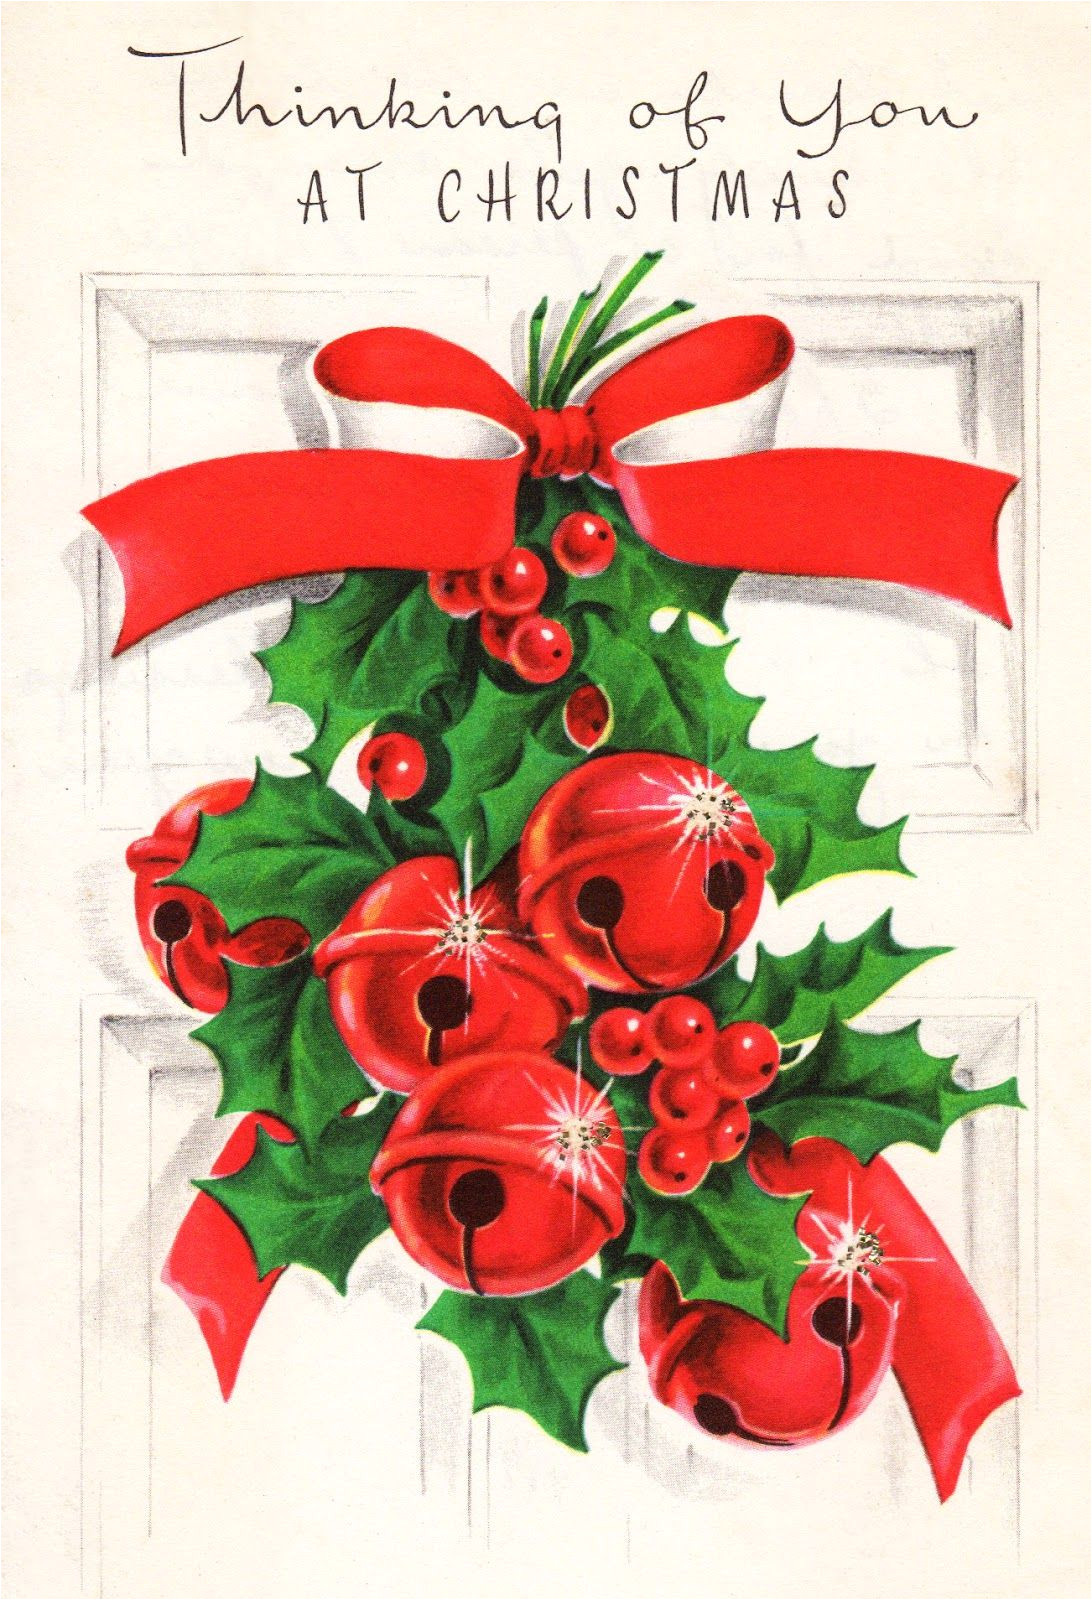 Greeting Words for Christmas Card December Birthday Call Christmas Card Messages Vintage